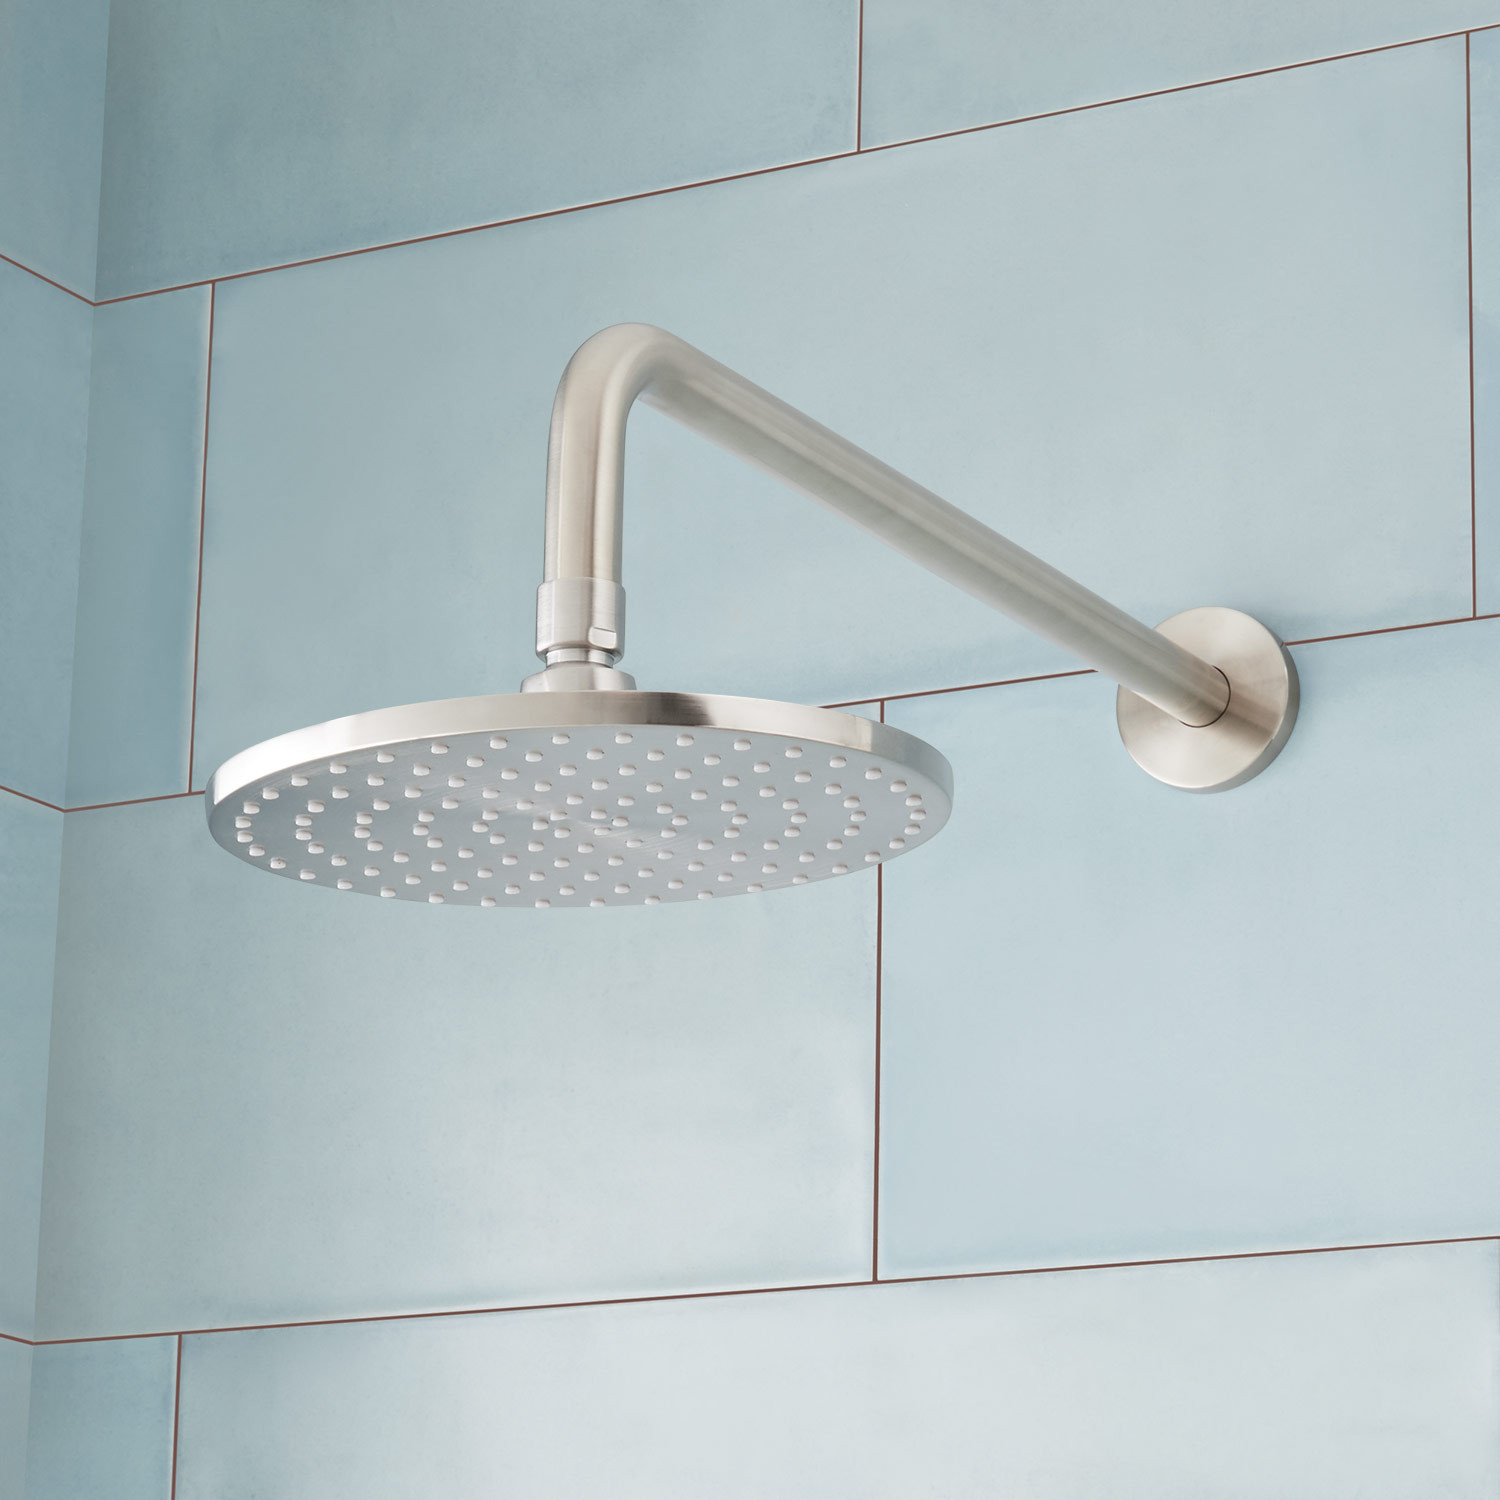 https://www.fontanashowers.com/v/vspfiles/assets/images/Round%20Wall%20Mount%20Rainfall%20Shower%20Head%20Product%20Display%203.jpg